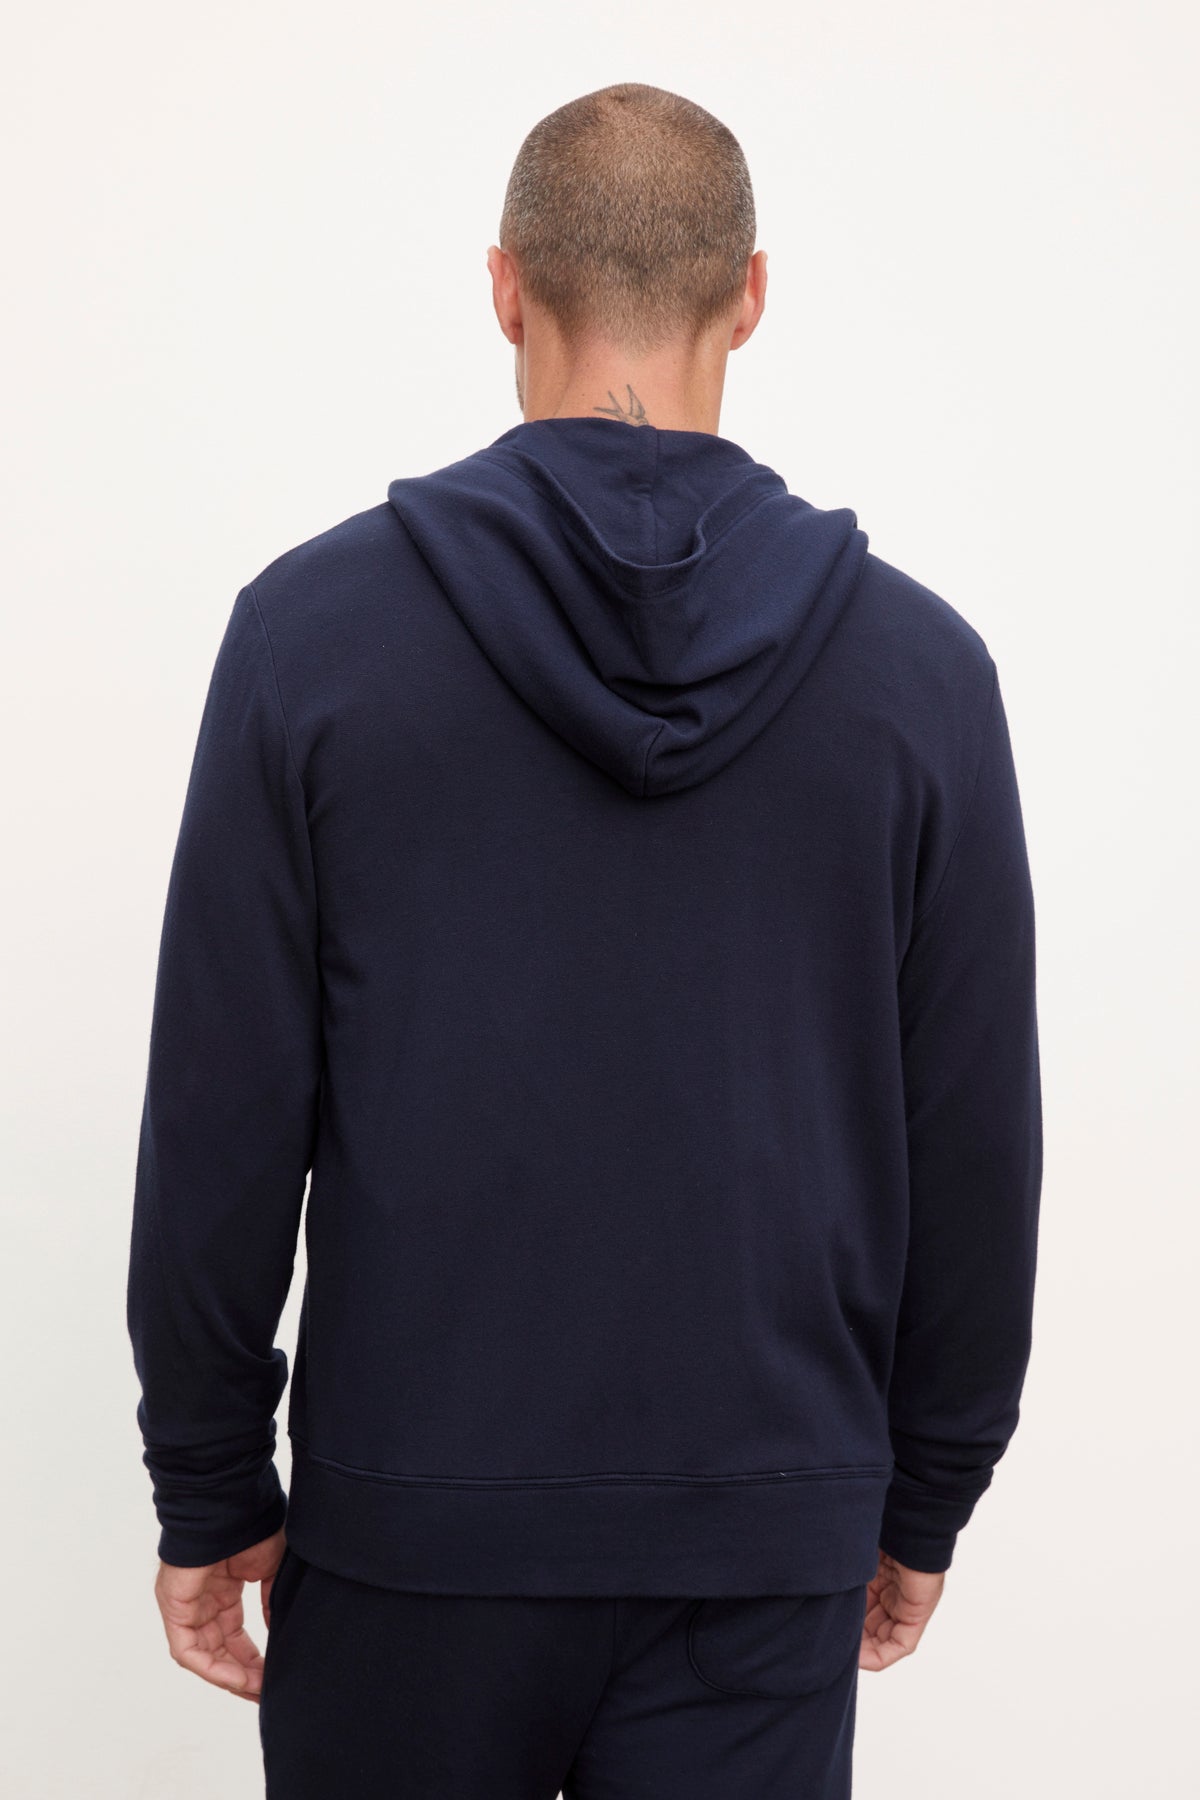   Man wearing a navy blue, medium-weight RODAN LUXE FLEECE ZIP HOODIE and matching pants, viewed from the back by Velvet by Graham & Spencer. 